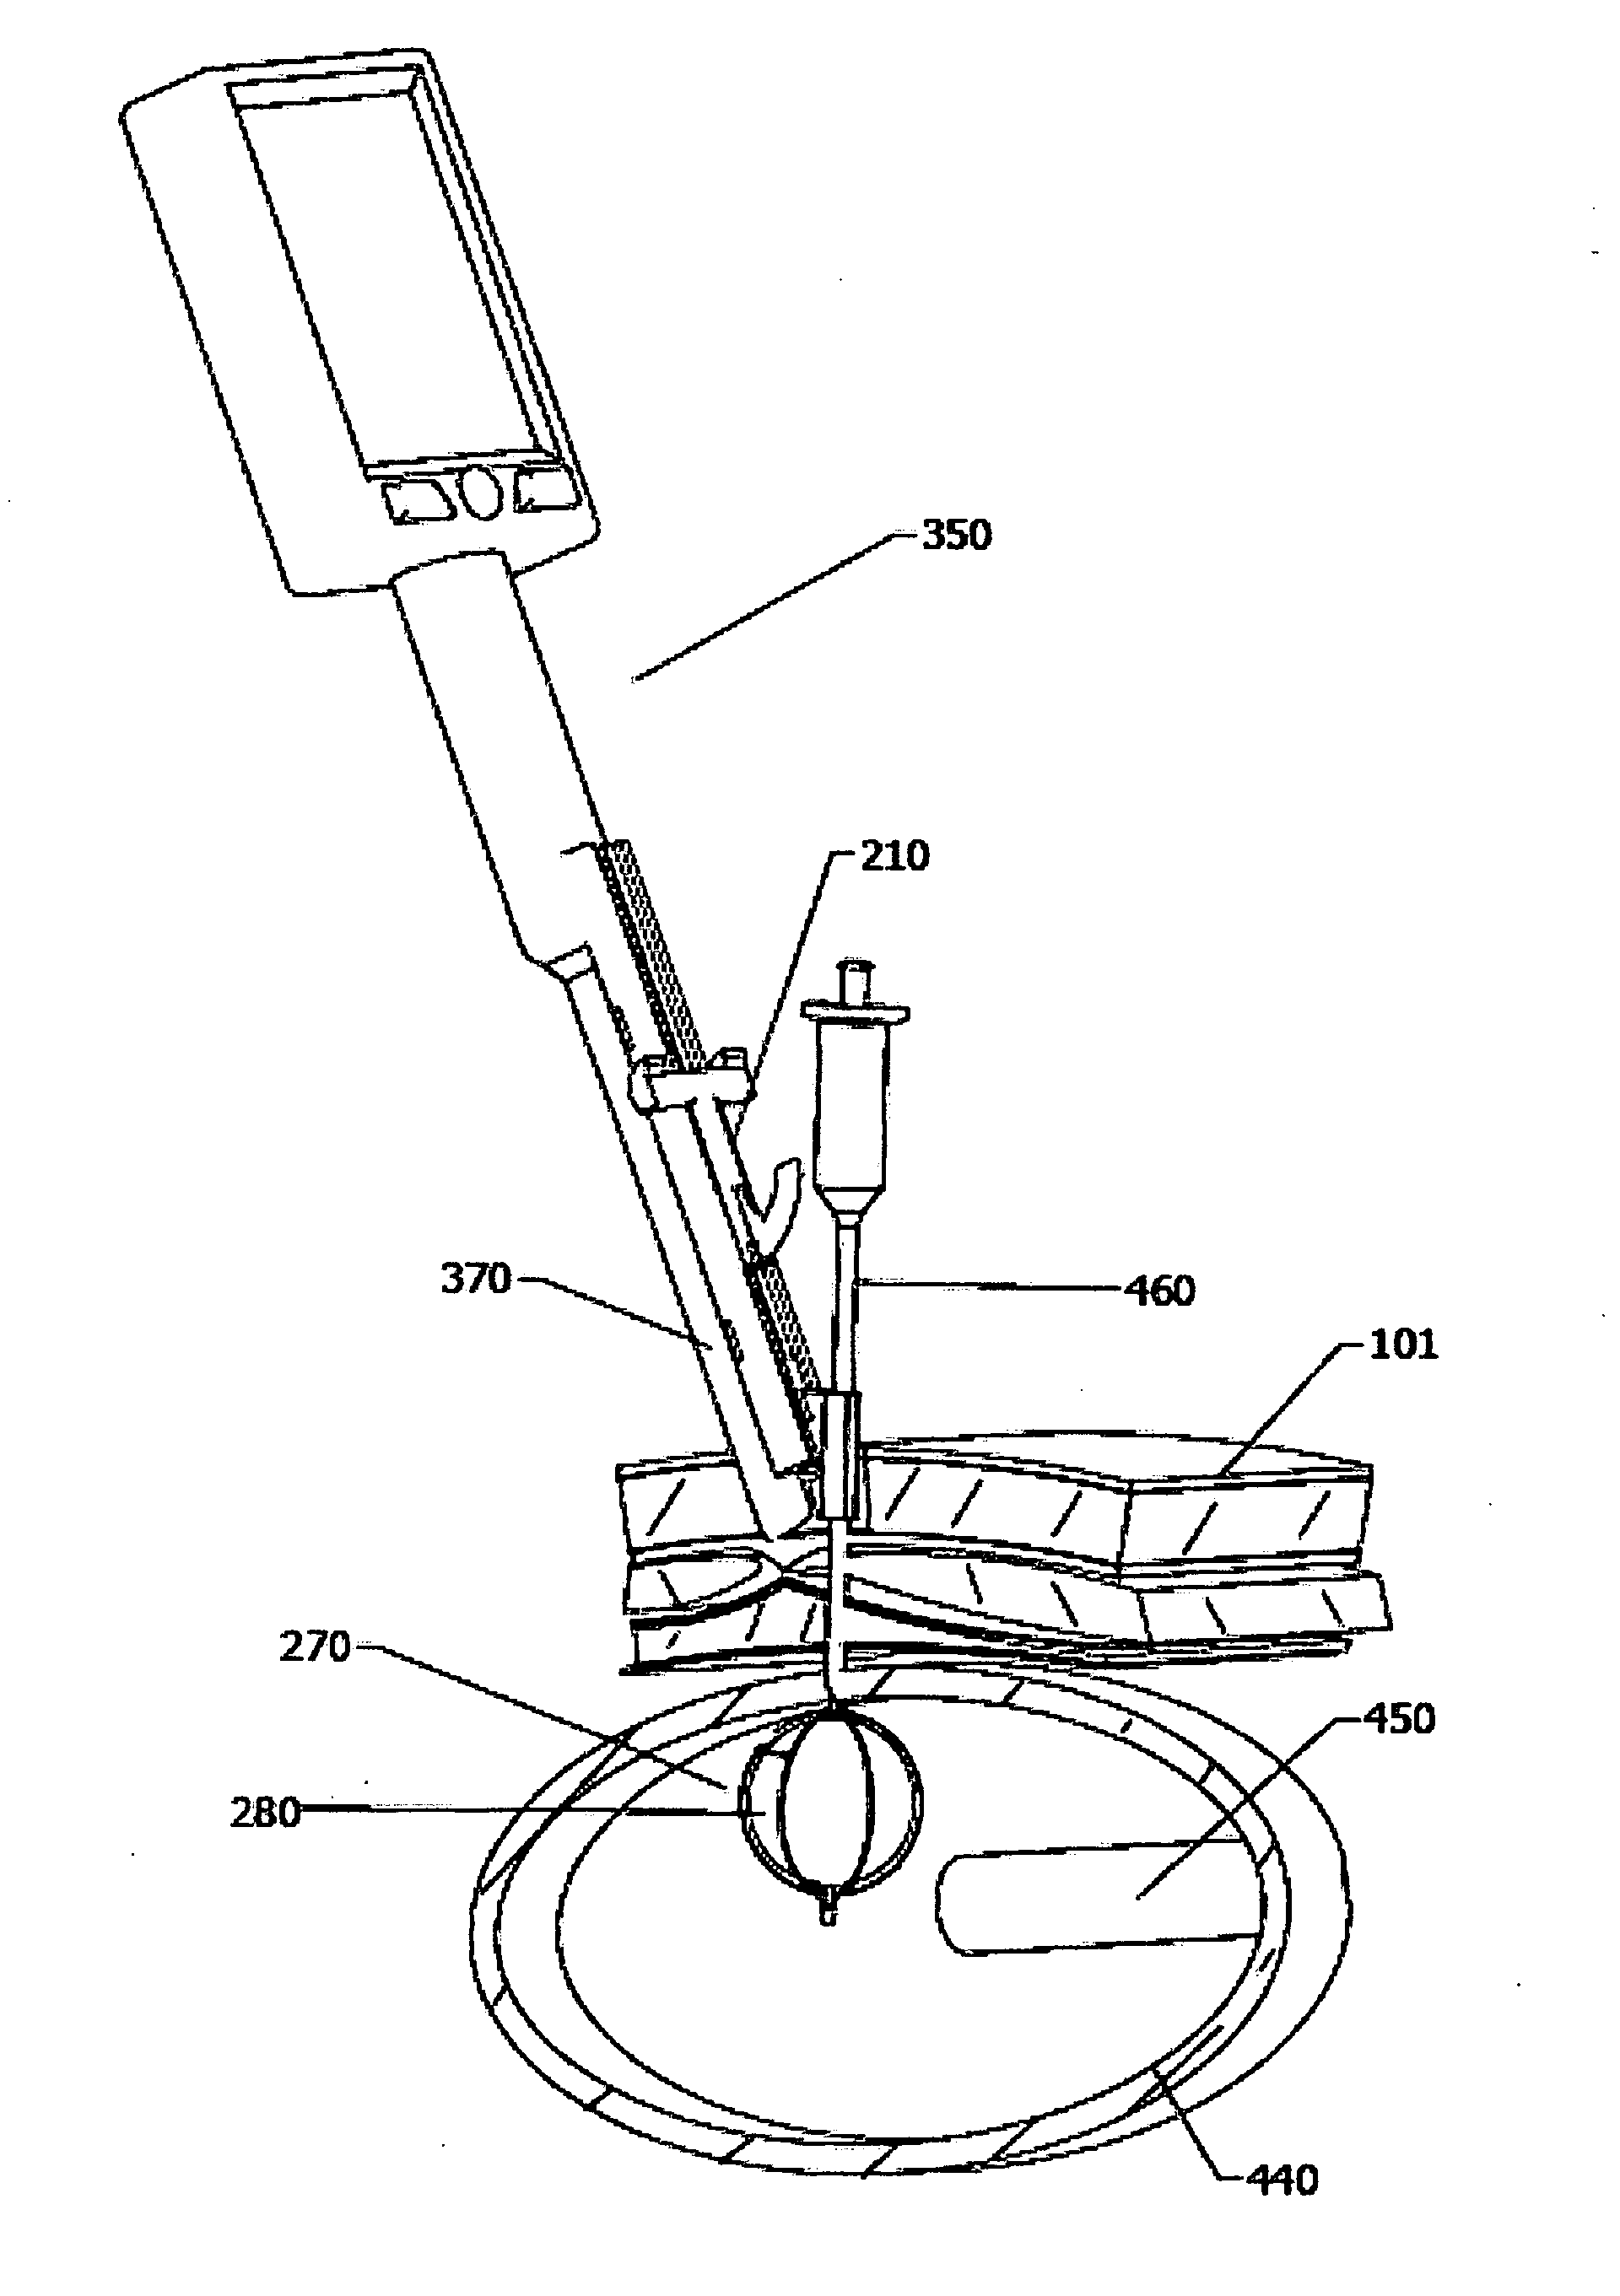 Method and device for ultrasound guided minimal invasive access of a bodily cavity